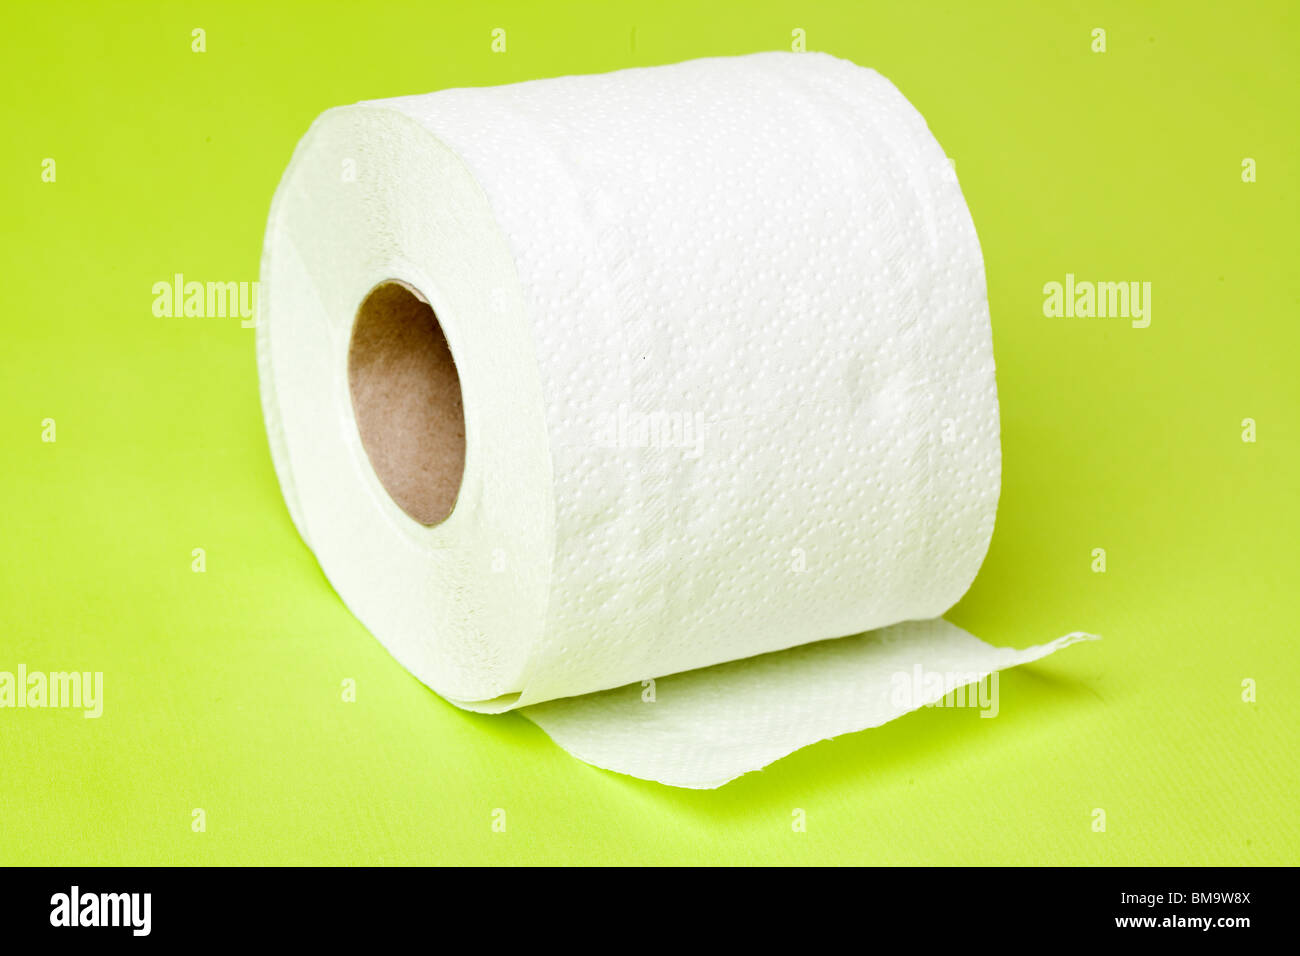 toilet paper on green background Stock Photo